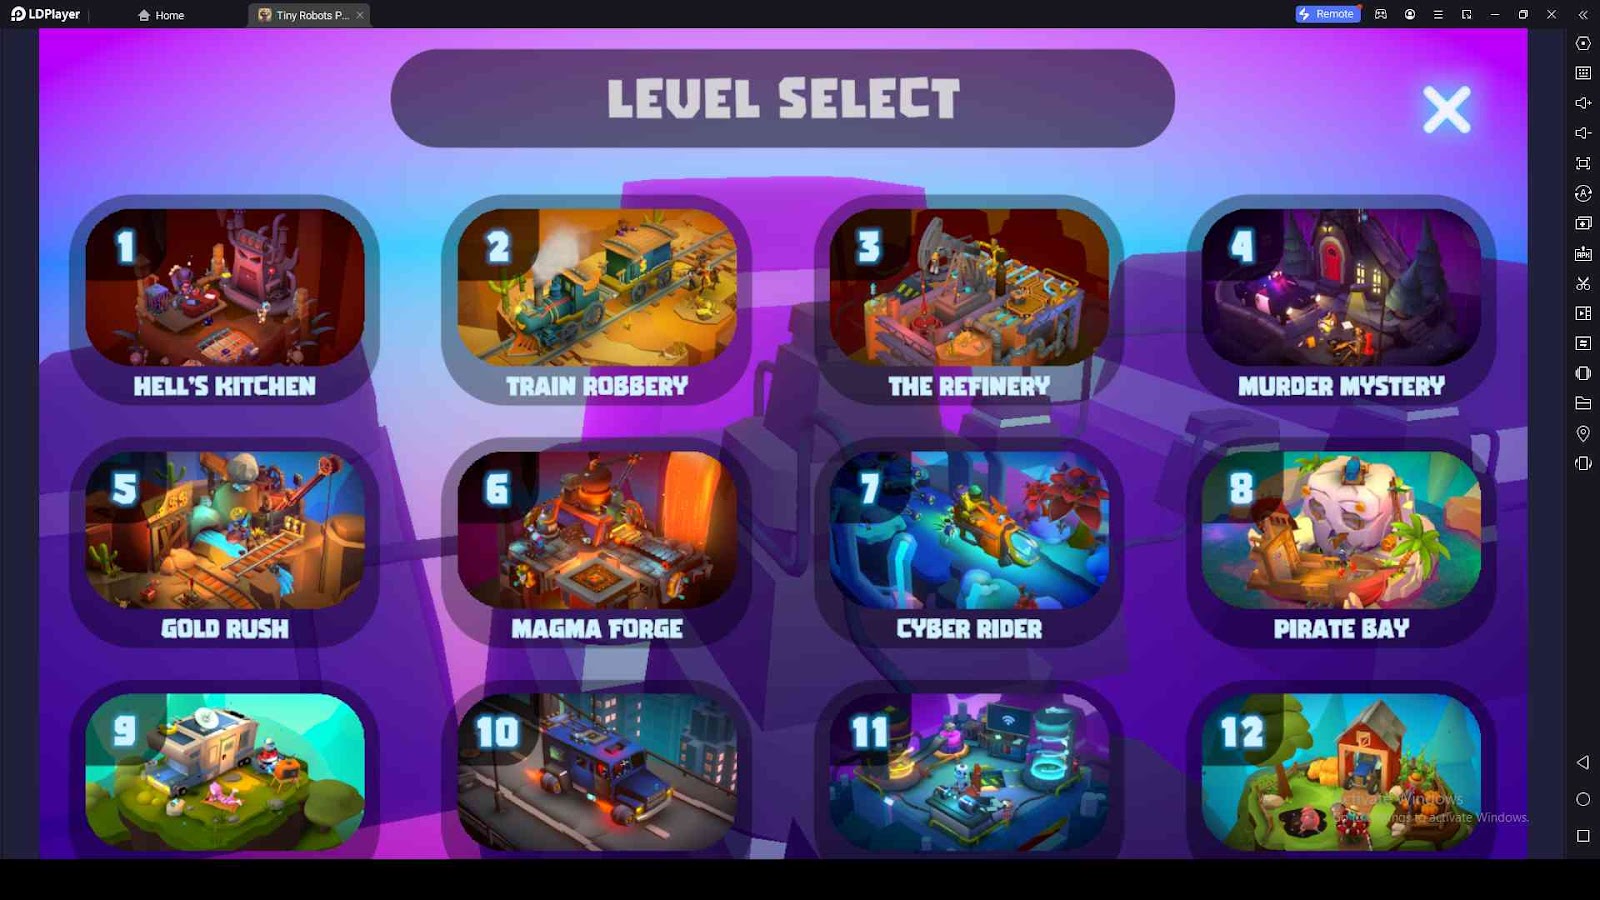 Lots of Levels to Play